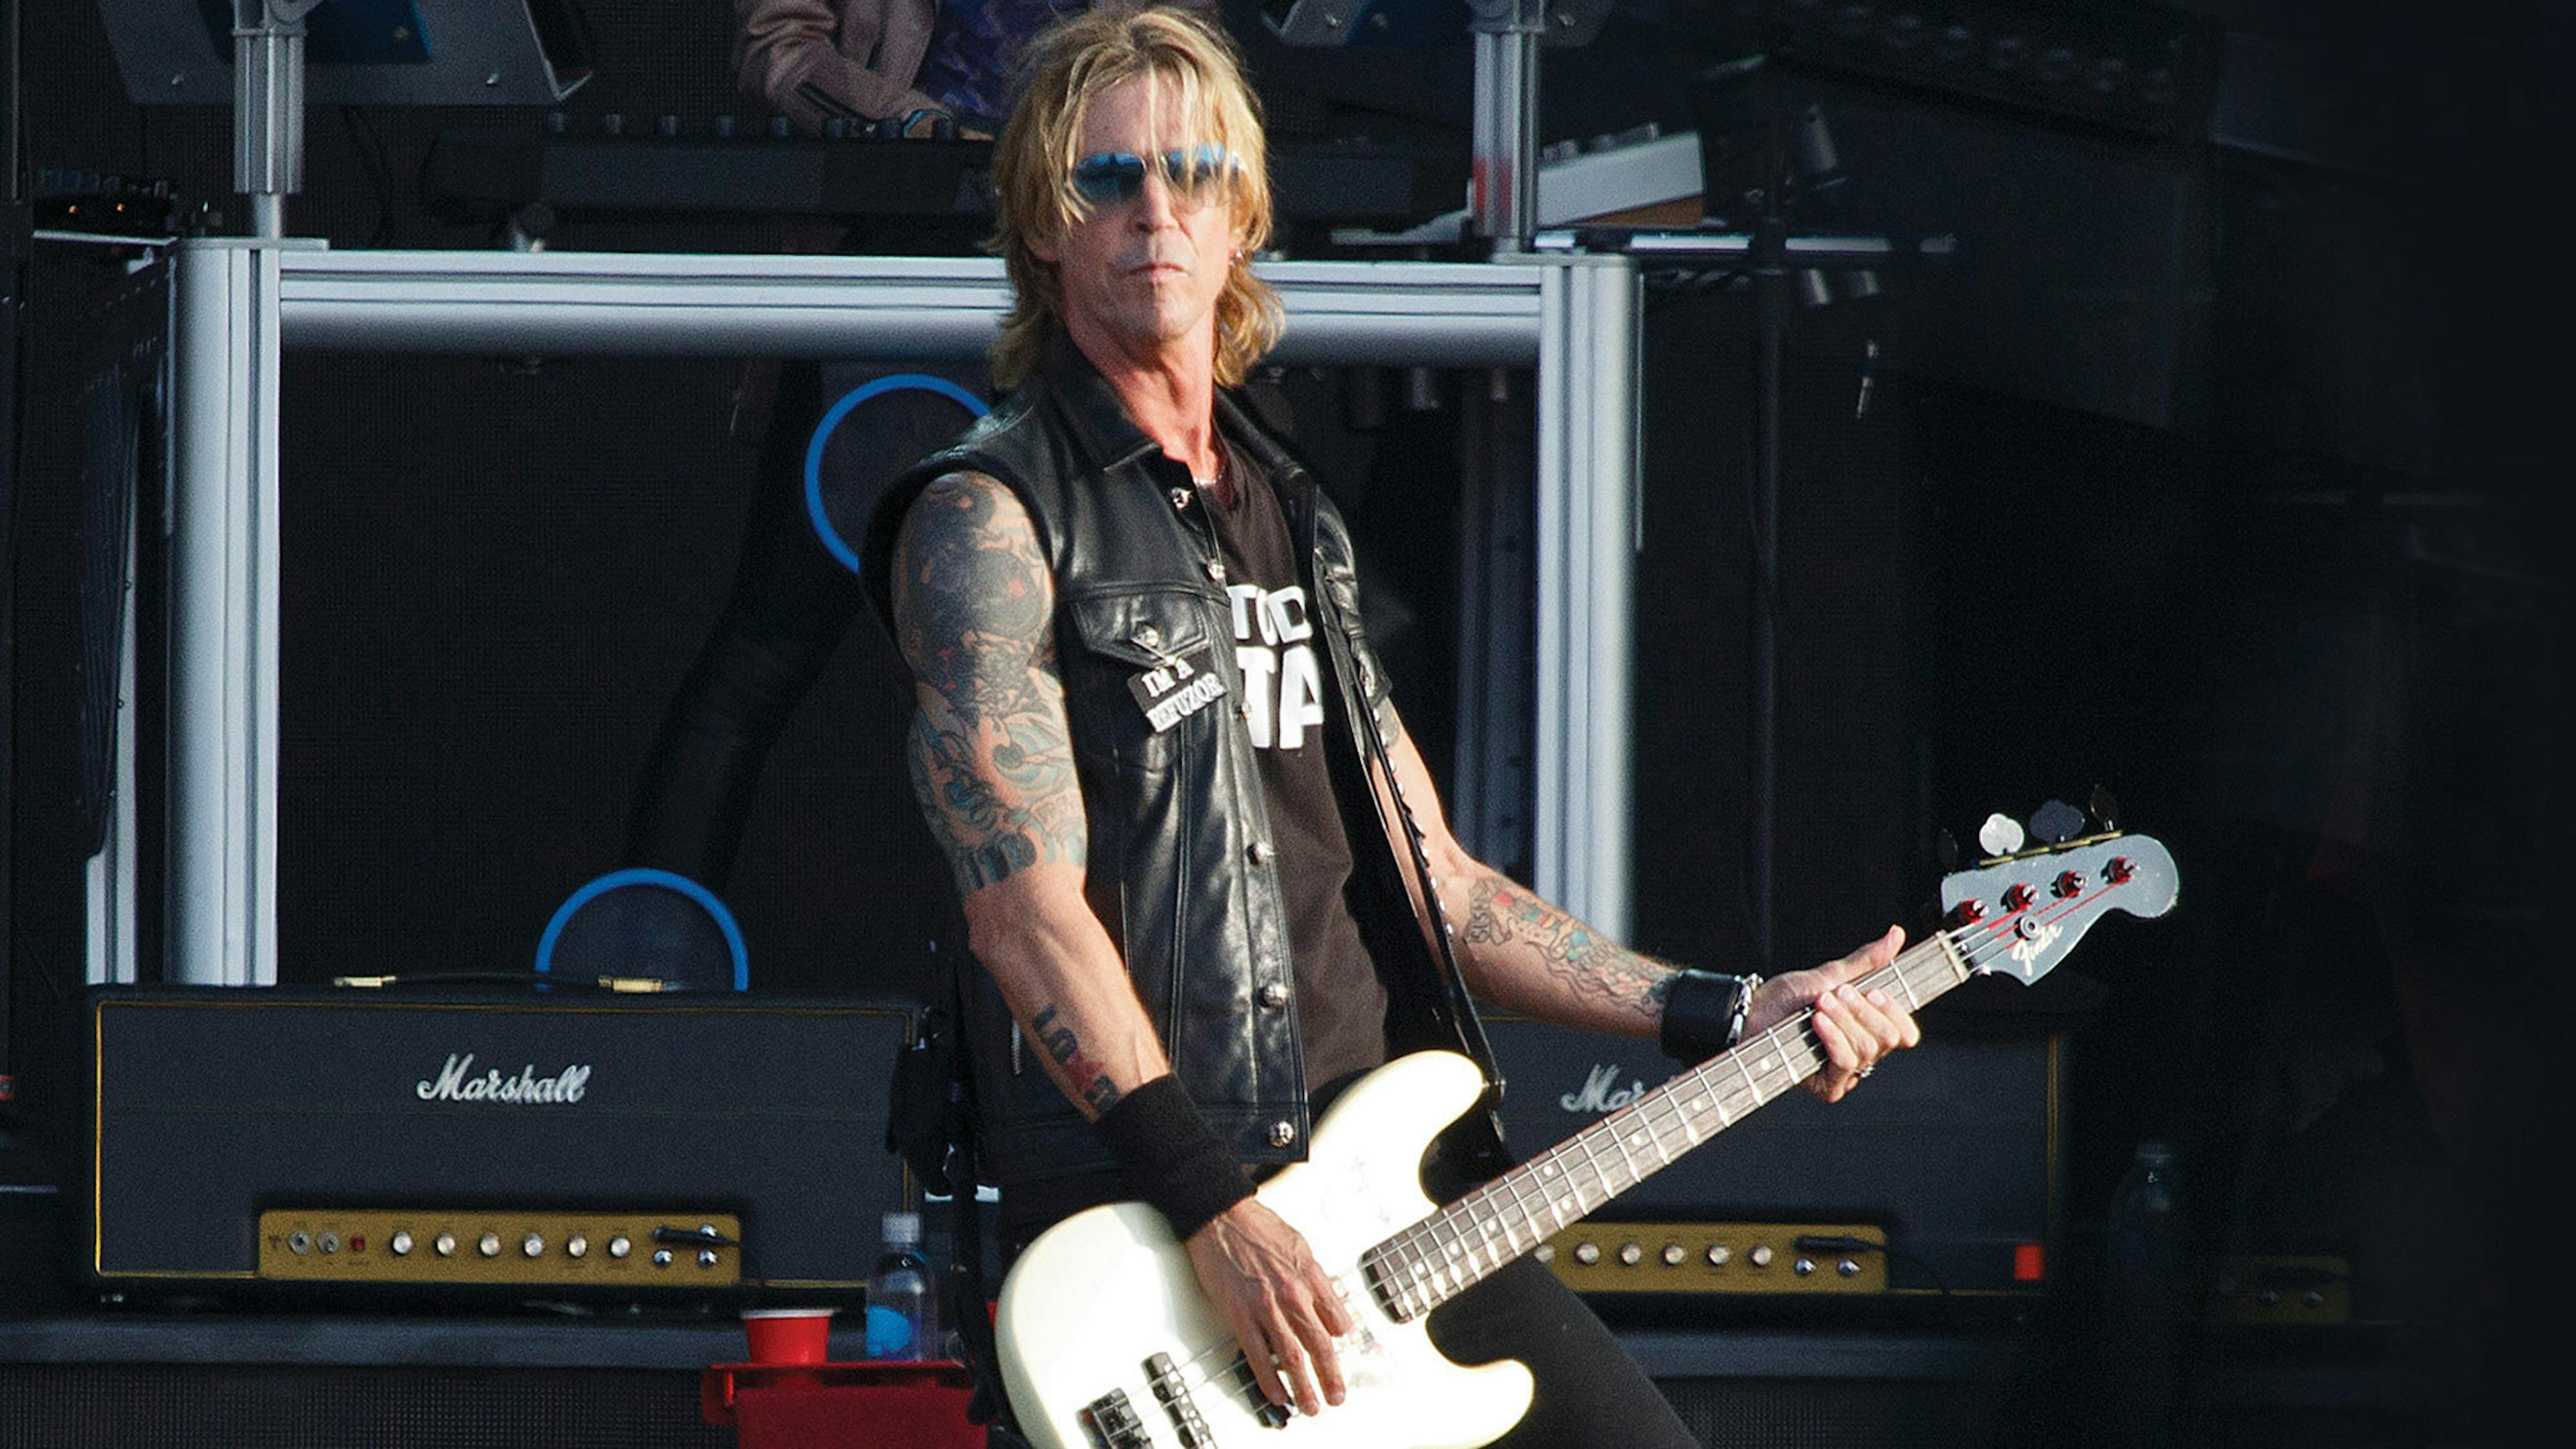 7 things you probably didn’t know about Duff McKagan